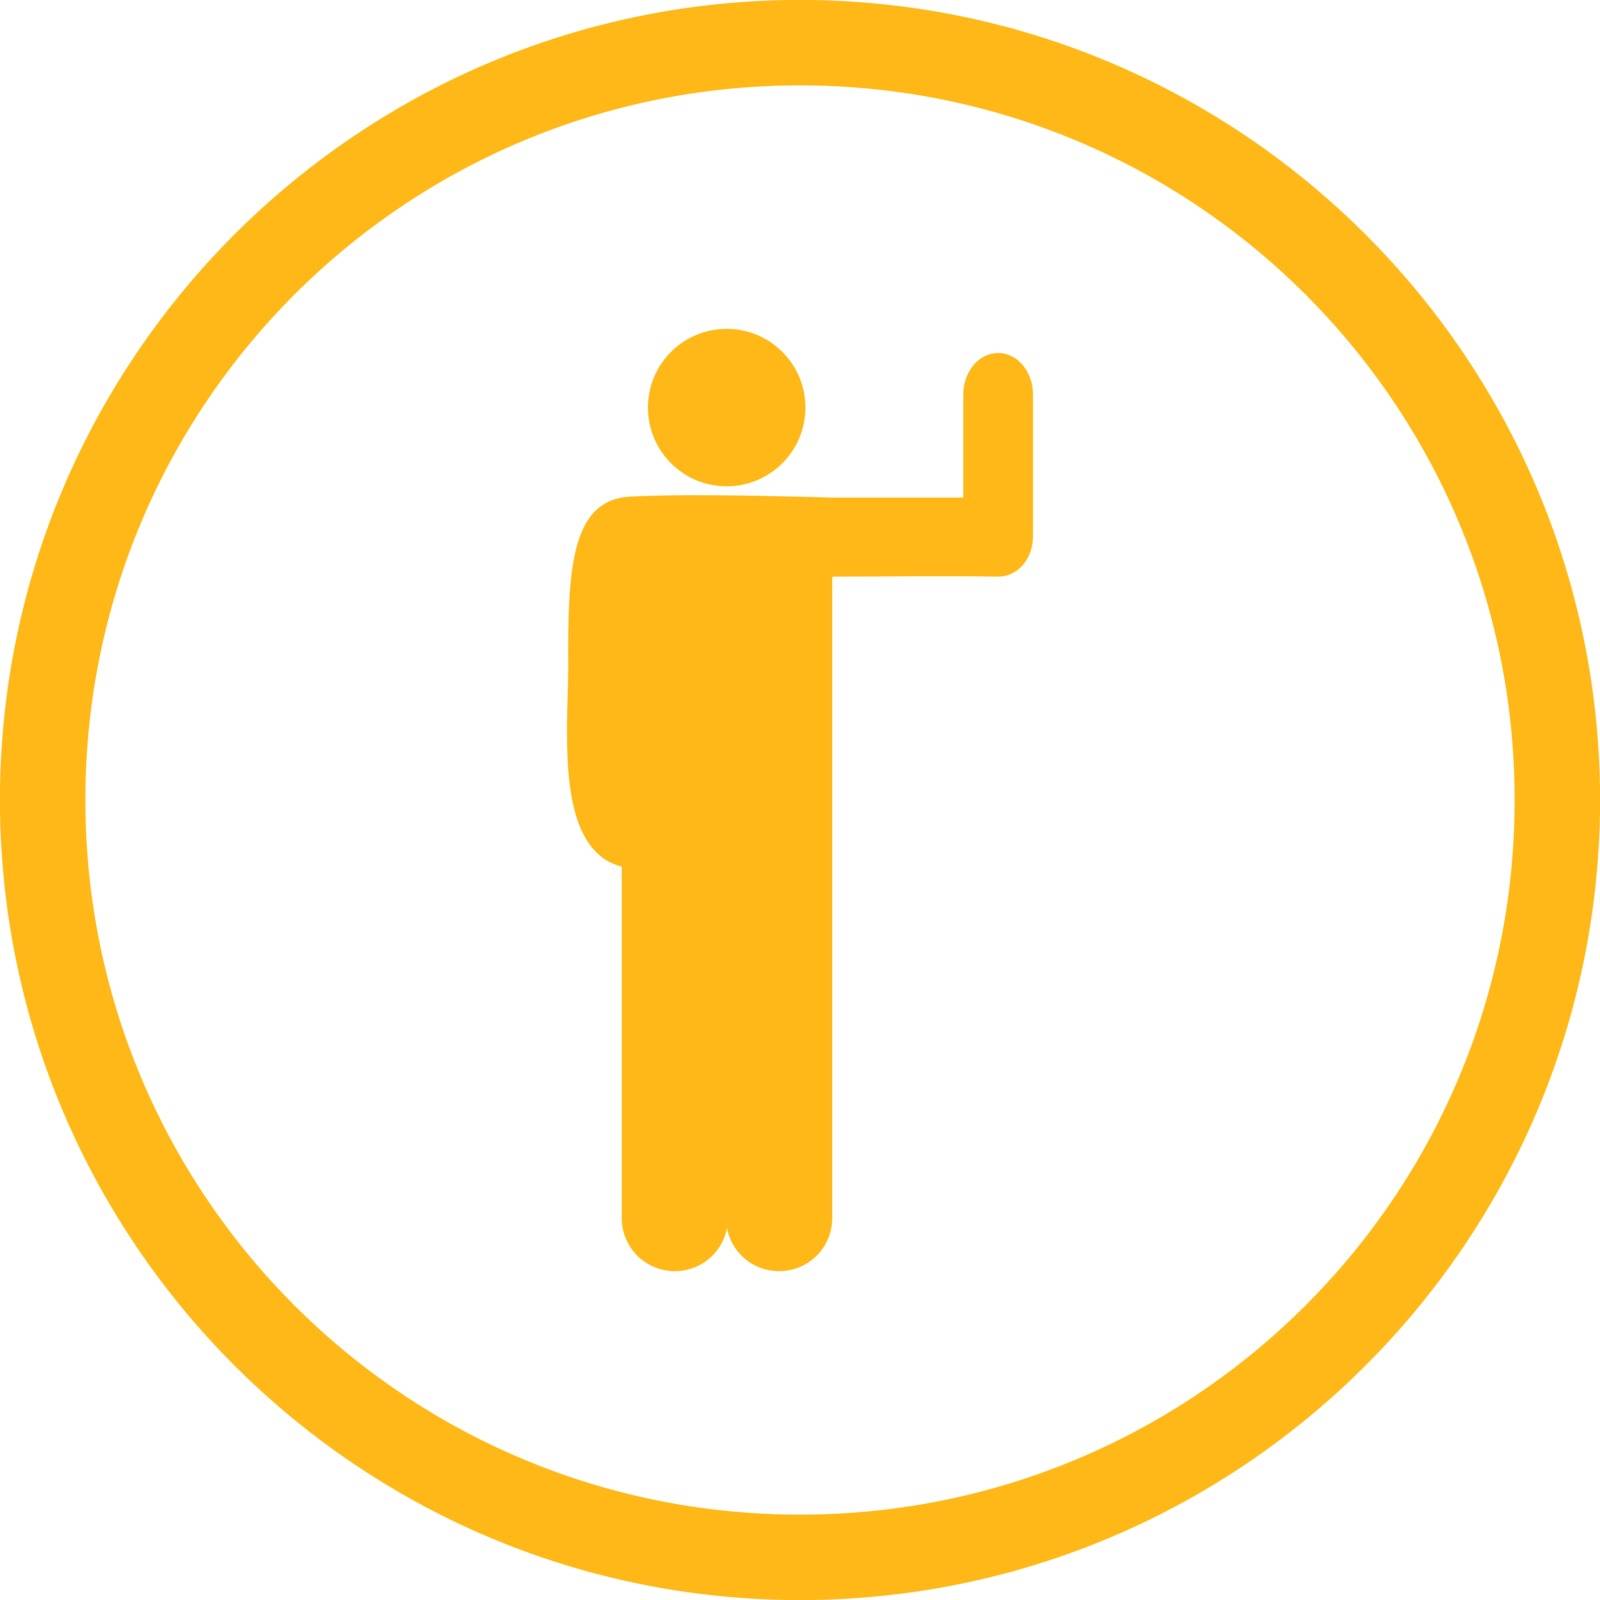 Vote vector icon. This rounded flat symbol is drawn with yellow color on a white background.